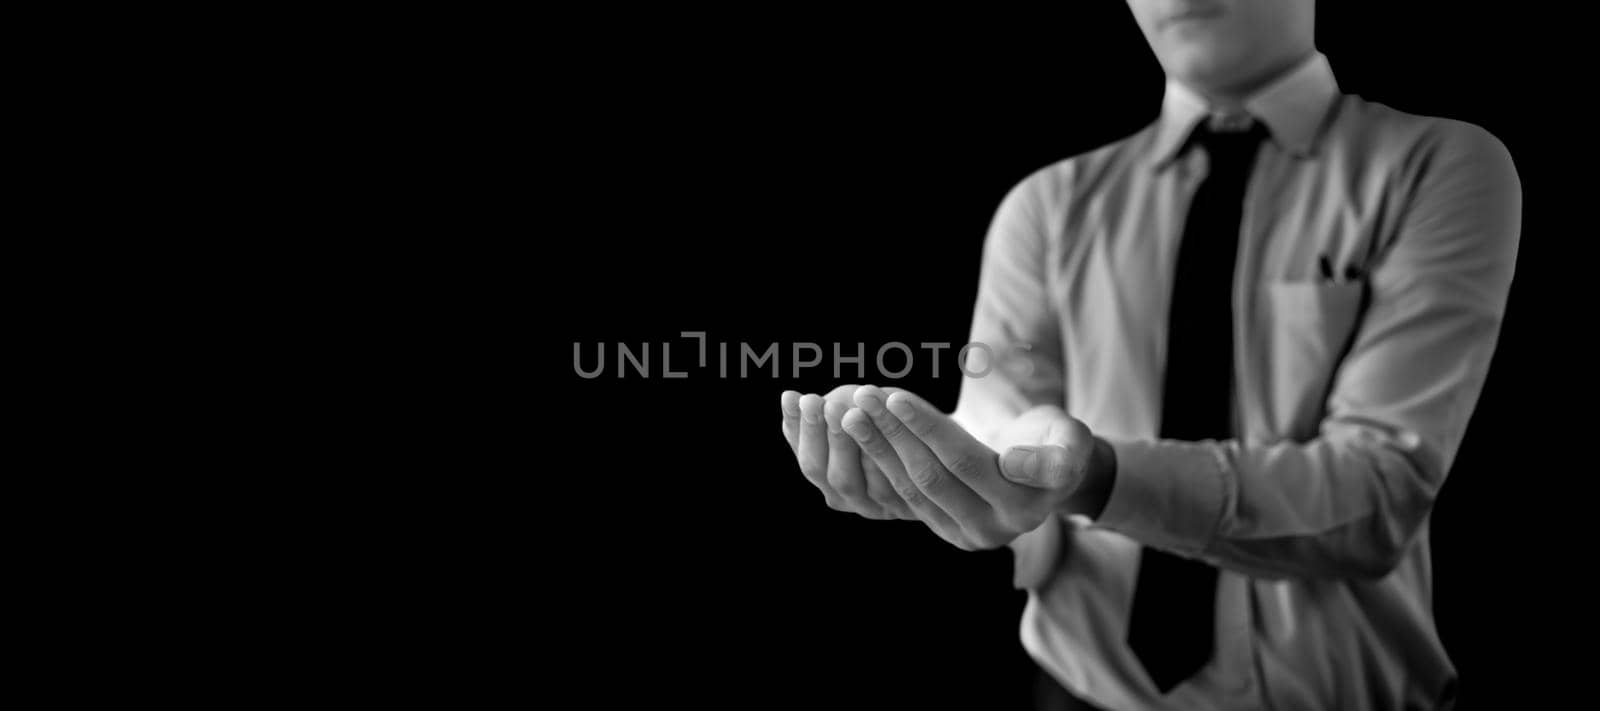 Shot of a unrecognizable man wearing blue shirt black tie and hands in a shape containing something inside it isolated on black background. by mirzamlk